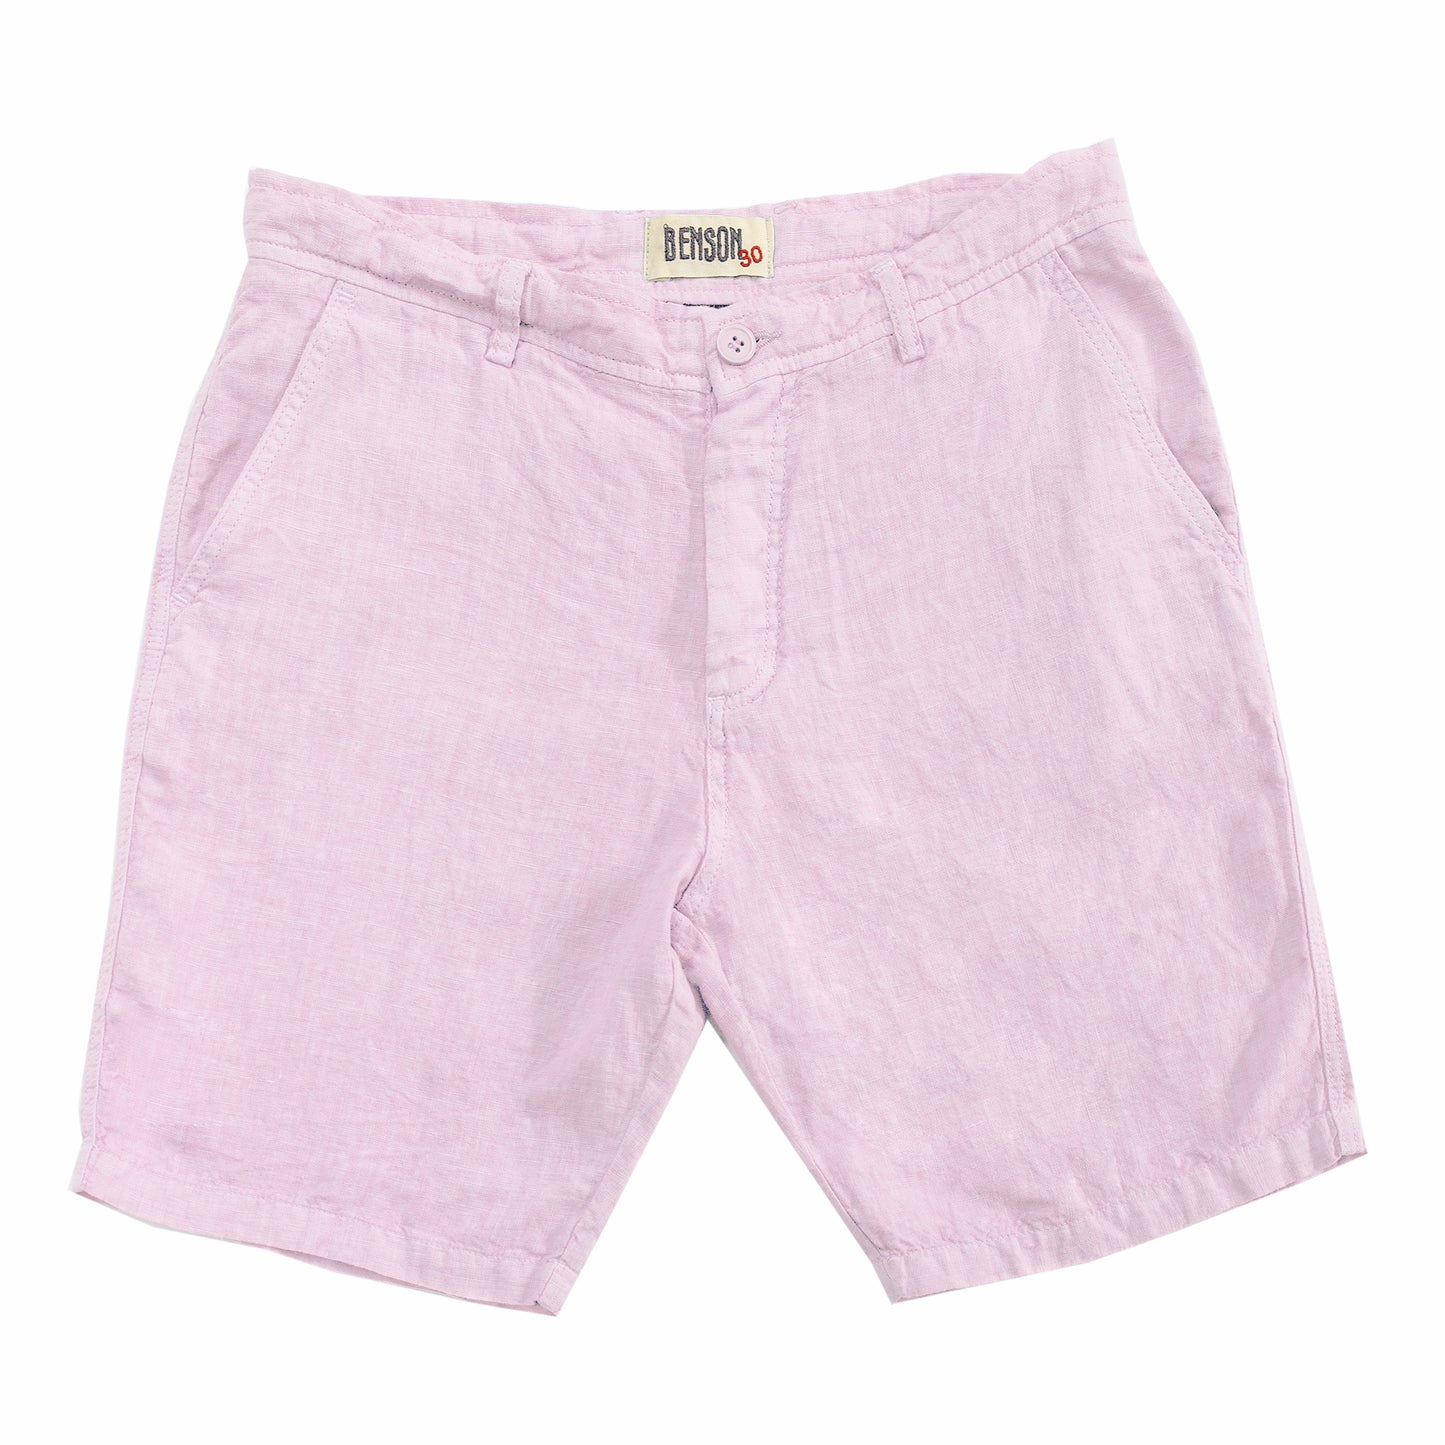 Palm Springs Pale Pink Linen Shorts